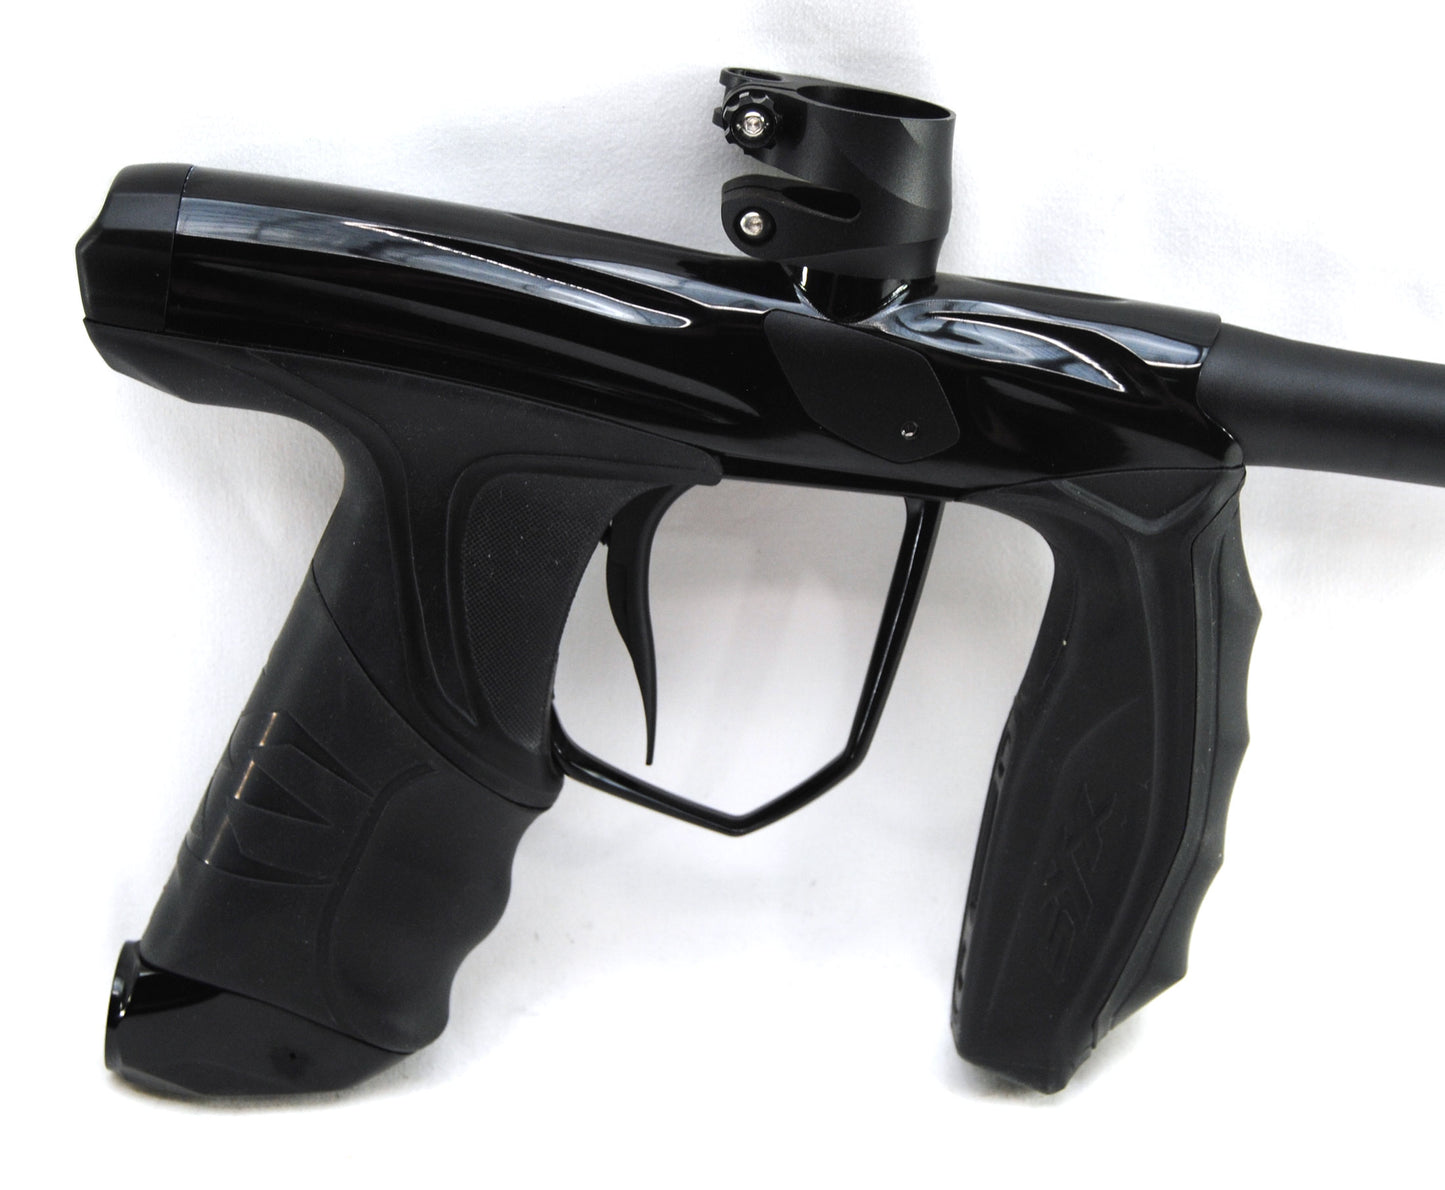 Used Empire SYX 1.5 Paintball Marker - Polished Black